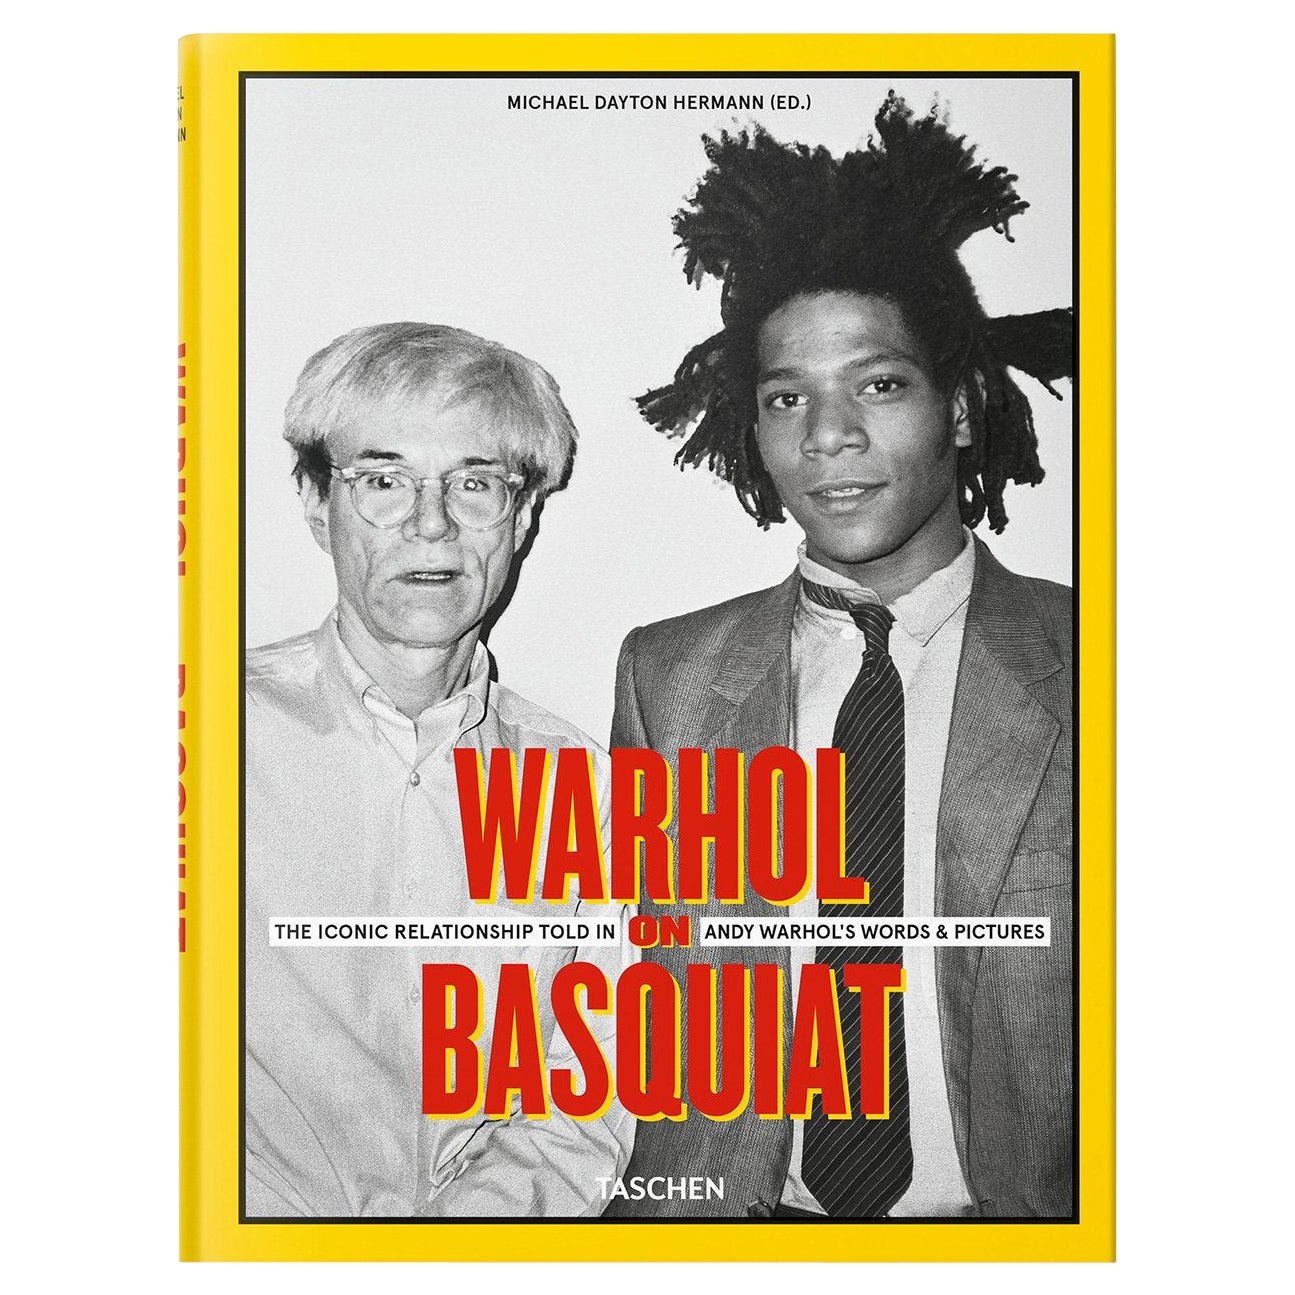 Warhol on Basquiat, the Iconic Relationship Told in Andy Warhol’s Words. Book For Sale